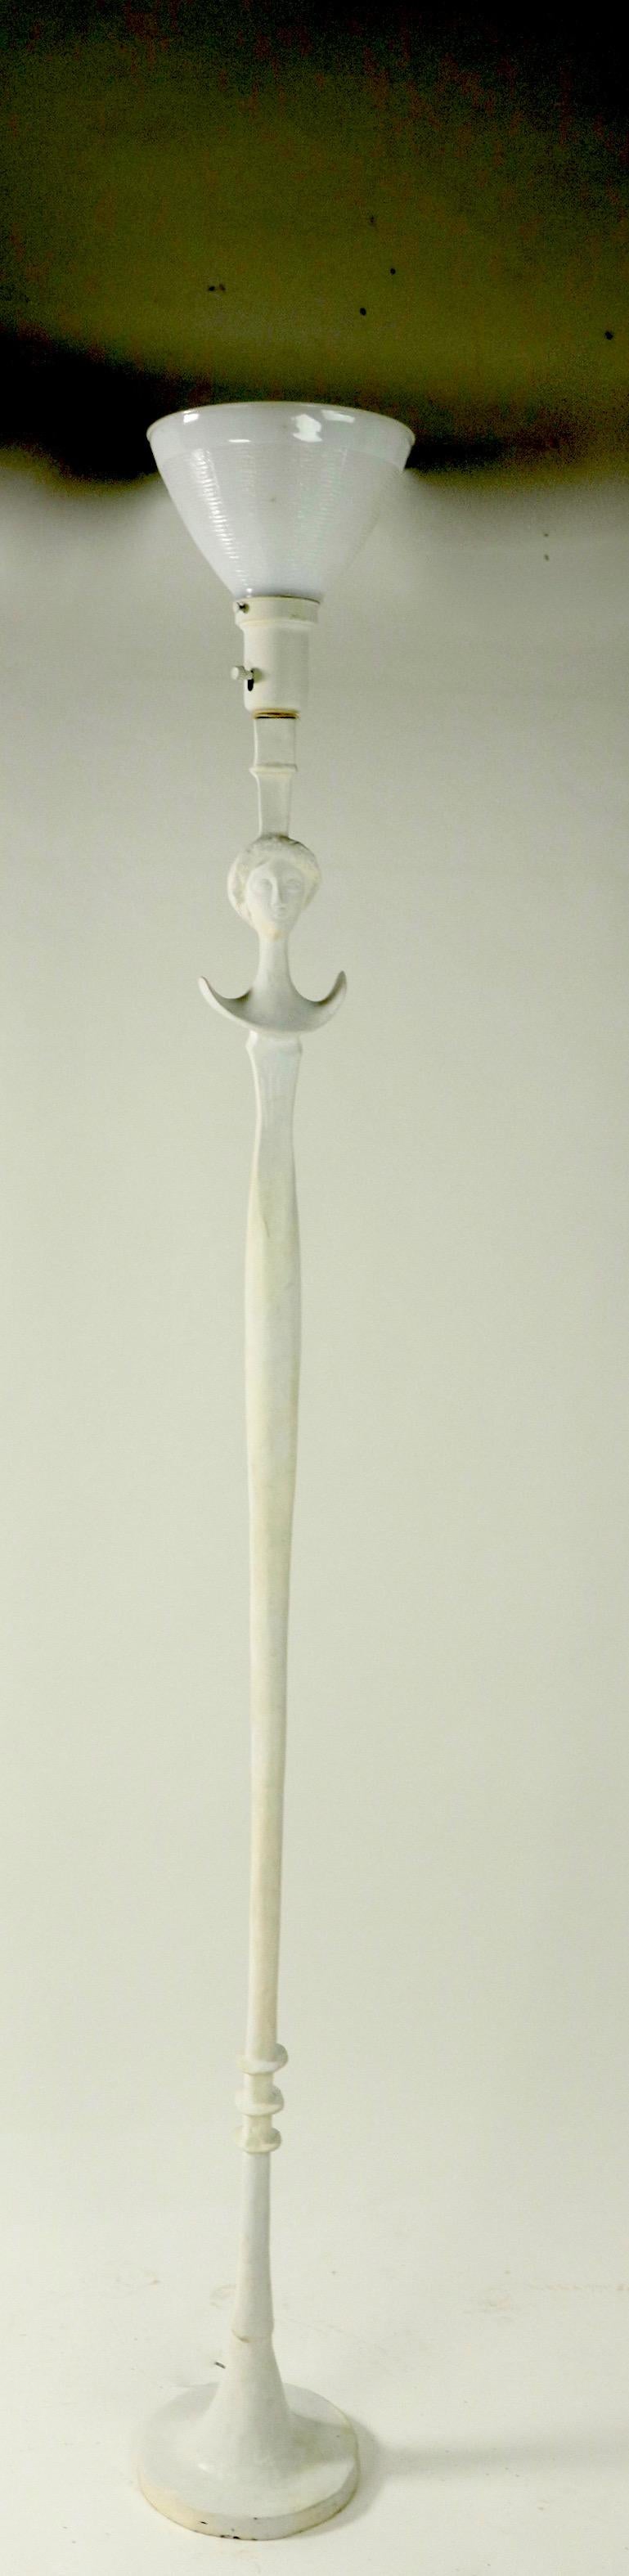 American Plaster Tete De Femme Floor Lamp by Sirmos after Giacometti